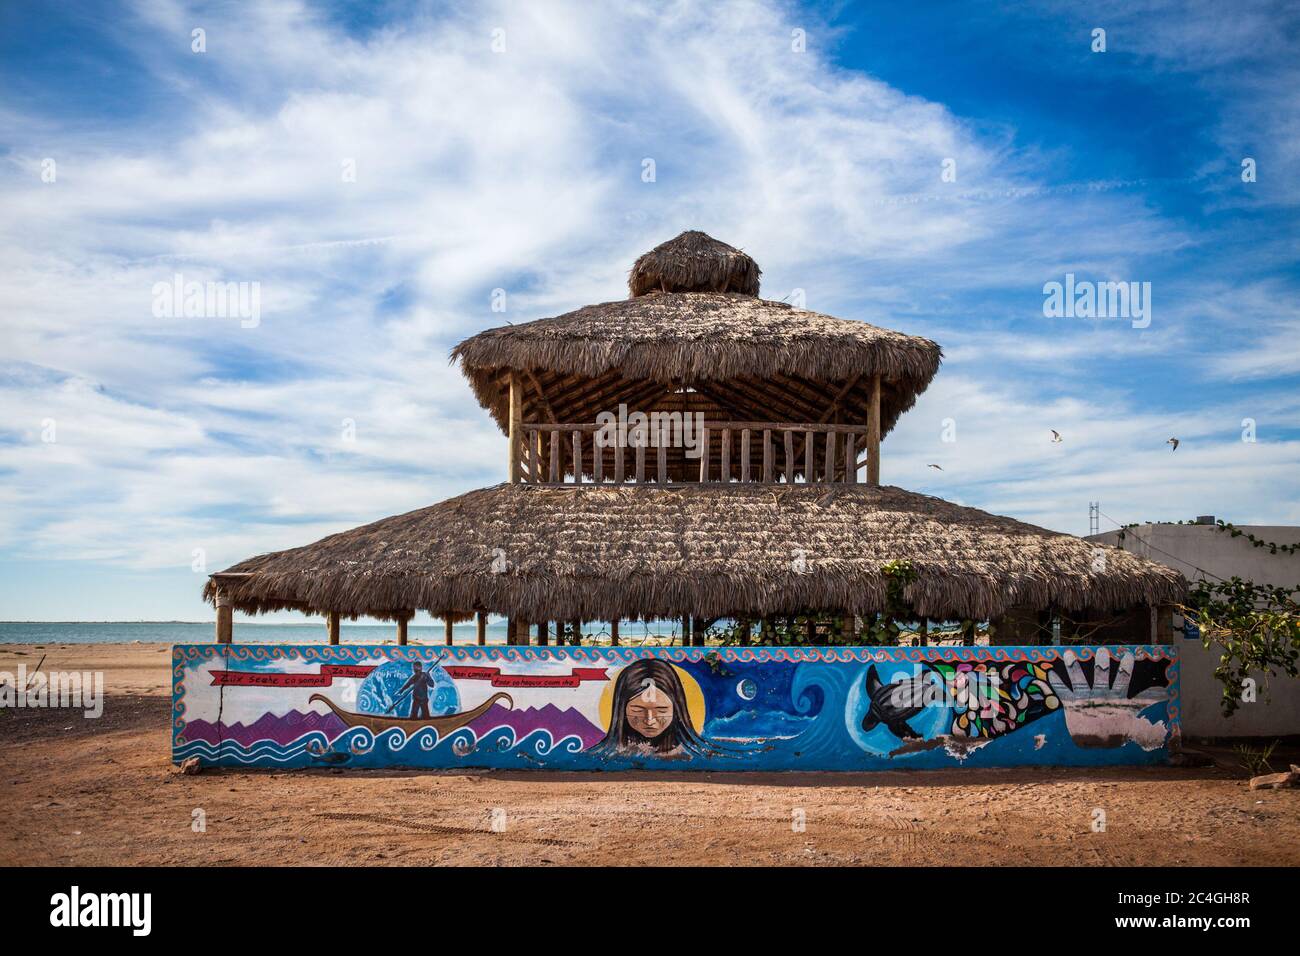 Punta Chueca, Mexico. 11th Dec, 2019. Palapa, traditional Mexican construction by the seaside of the ComcÃac indigenous community.The ComcÃac or Seri tribe, as they are known by many, are located in Punta Chueca, Sonora desert, by the northern pacific coast of Mexico. The ComcÃac indigenous community has a strong female presence within their culture. They are the principal organisers, promoters and those who are celebrated during the rituals and traditions of the community. This could not be clearer, than during one of the most important rituals of the community, the ceremony of puberty. T Stock Photo